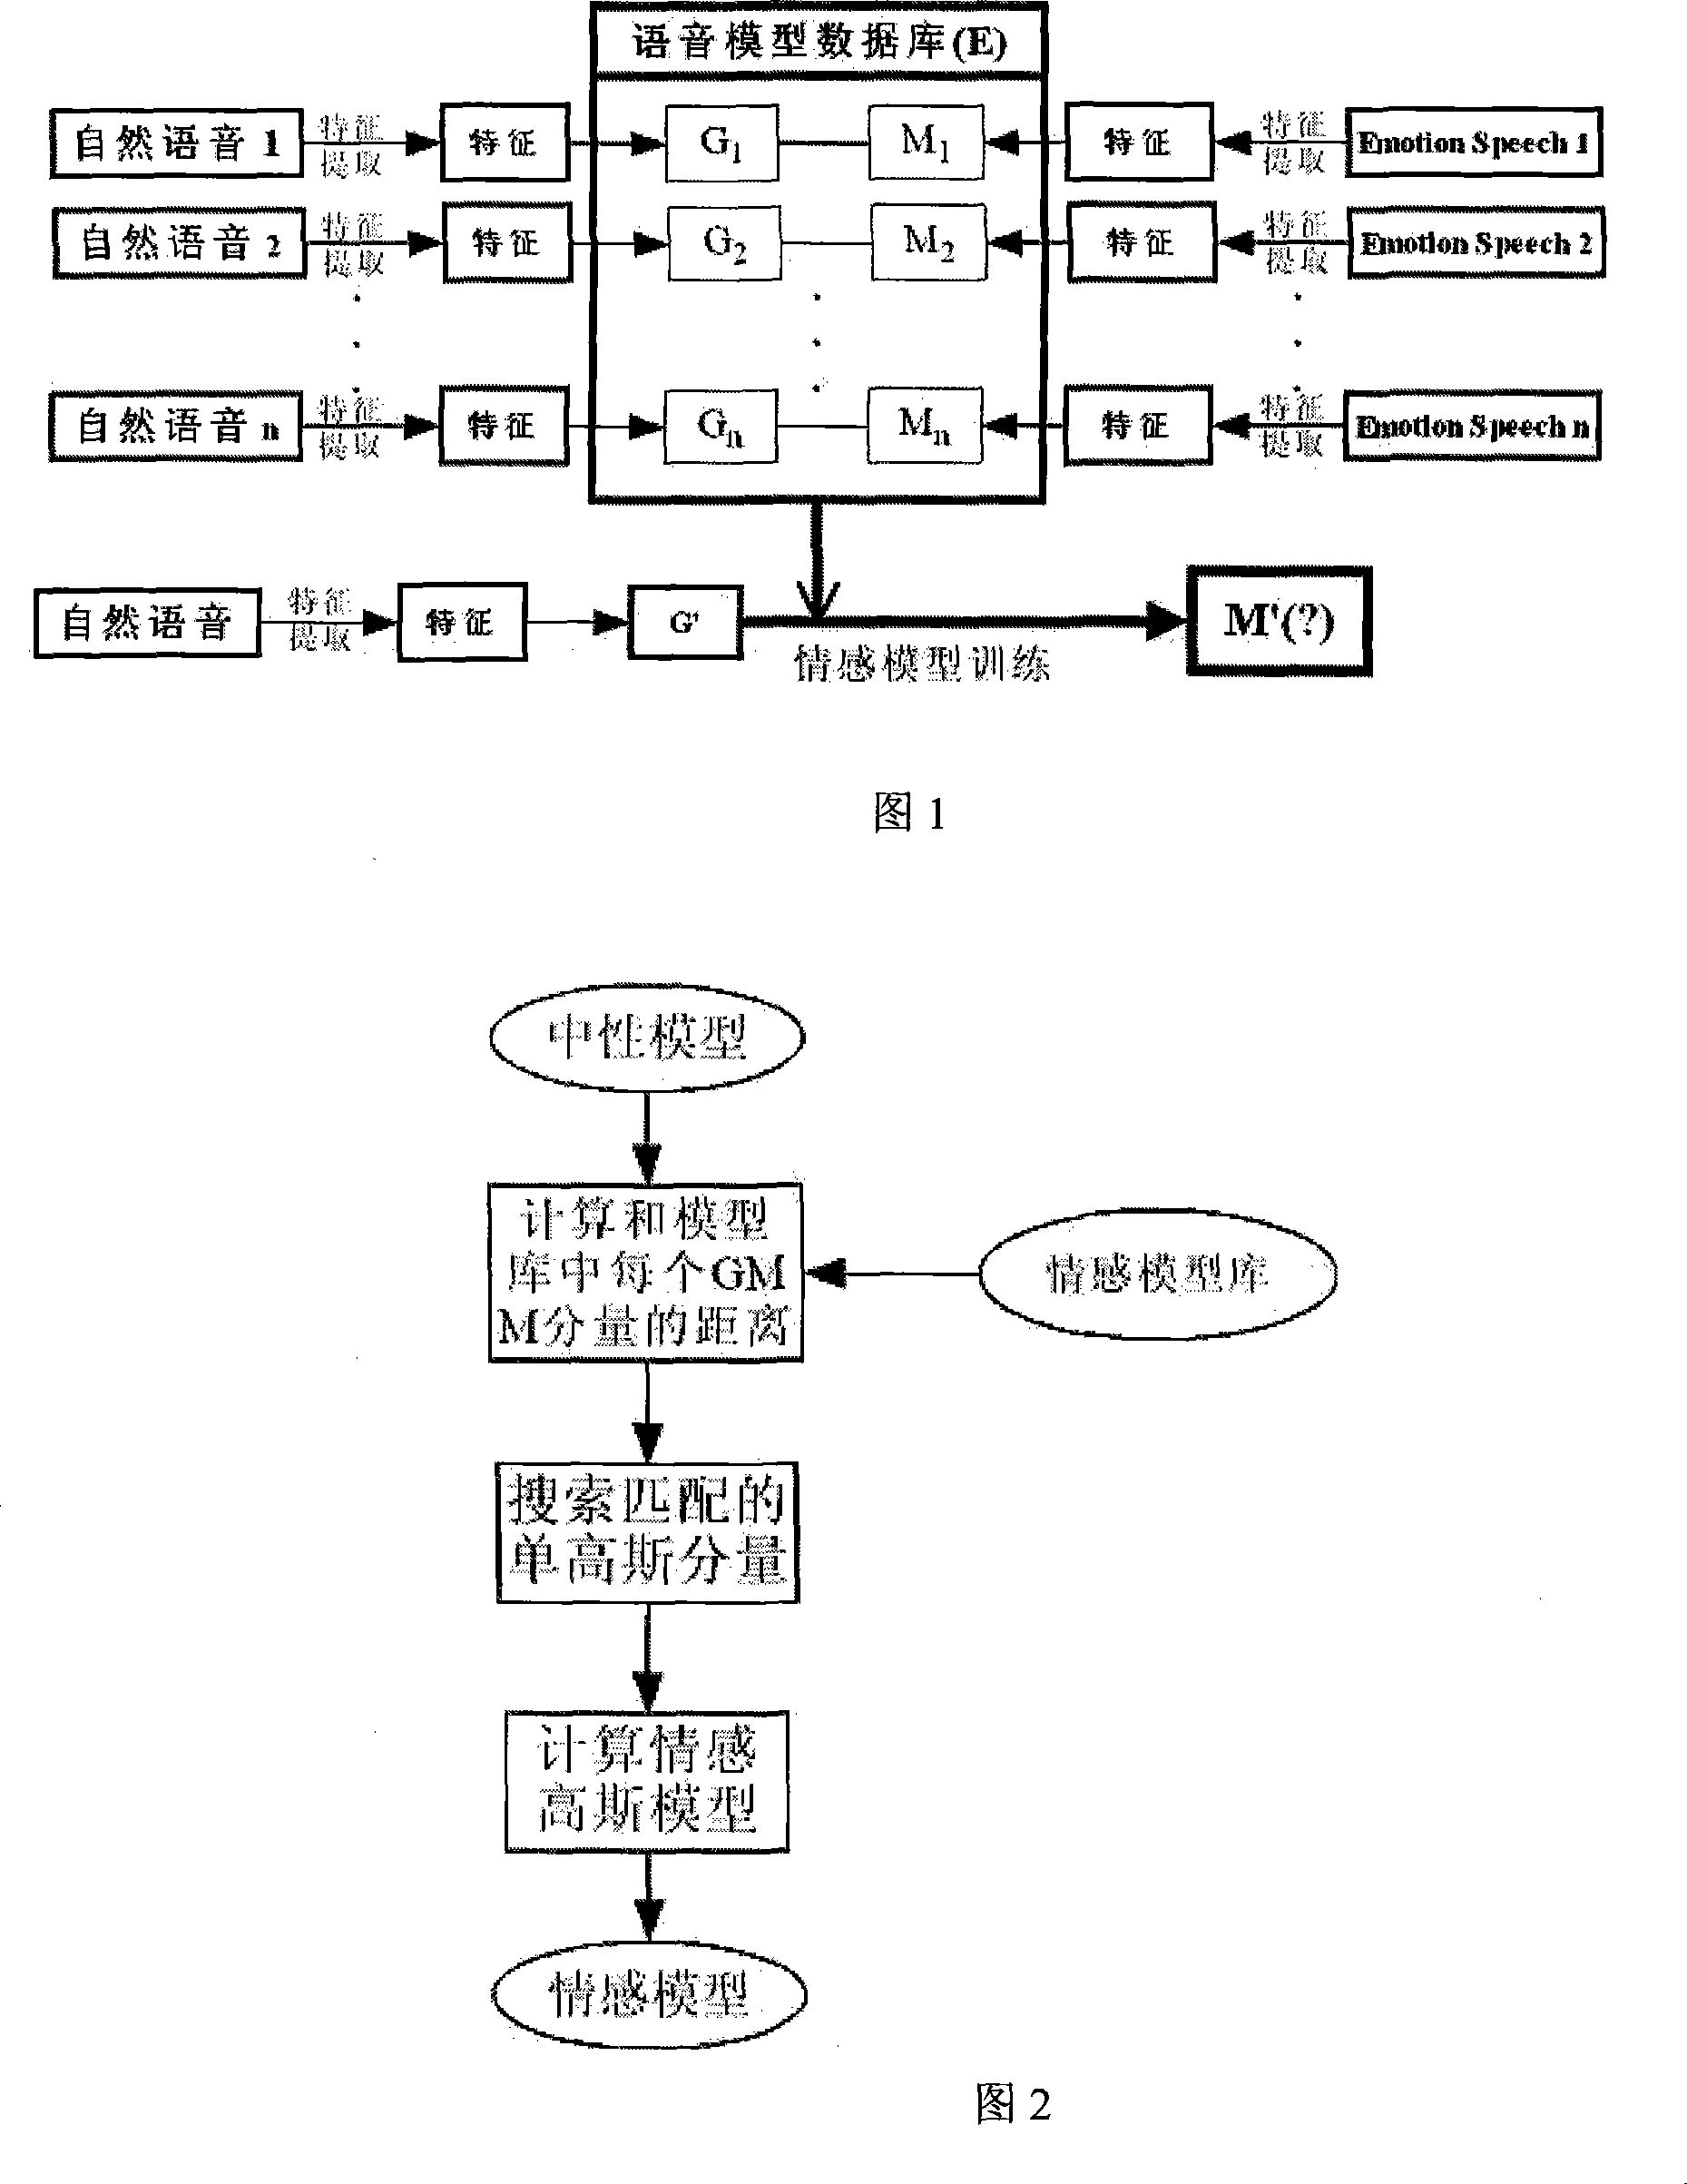 Method for recognizing speaker based on conversion of neutral and affection sound-groove model